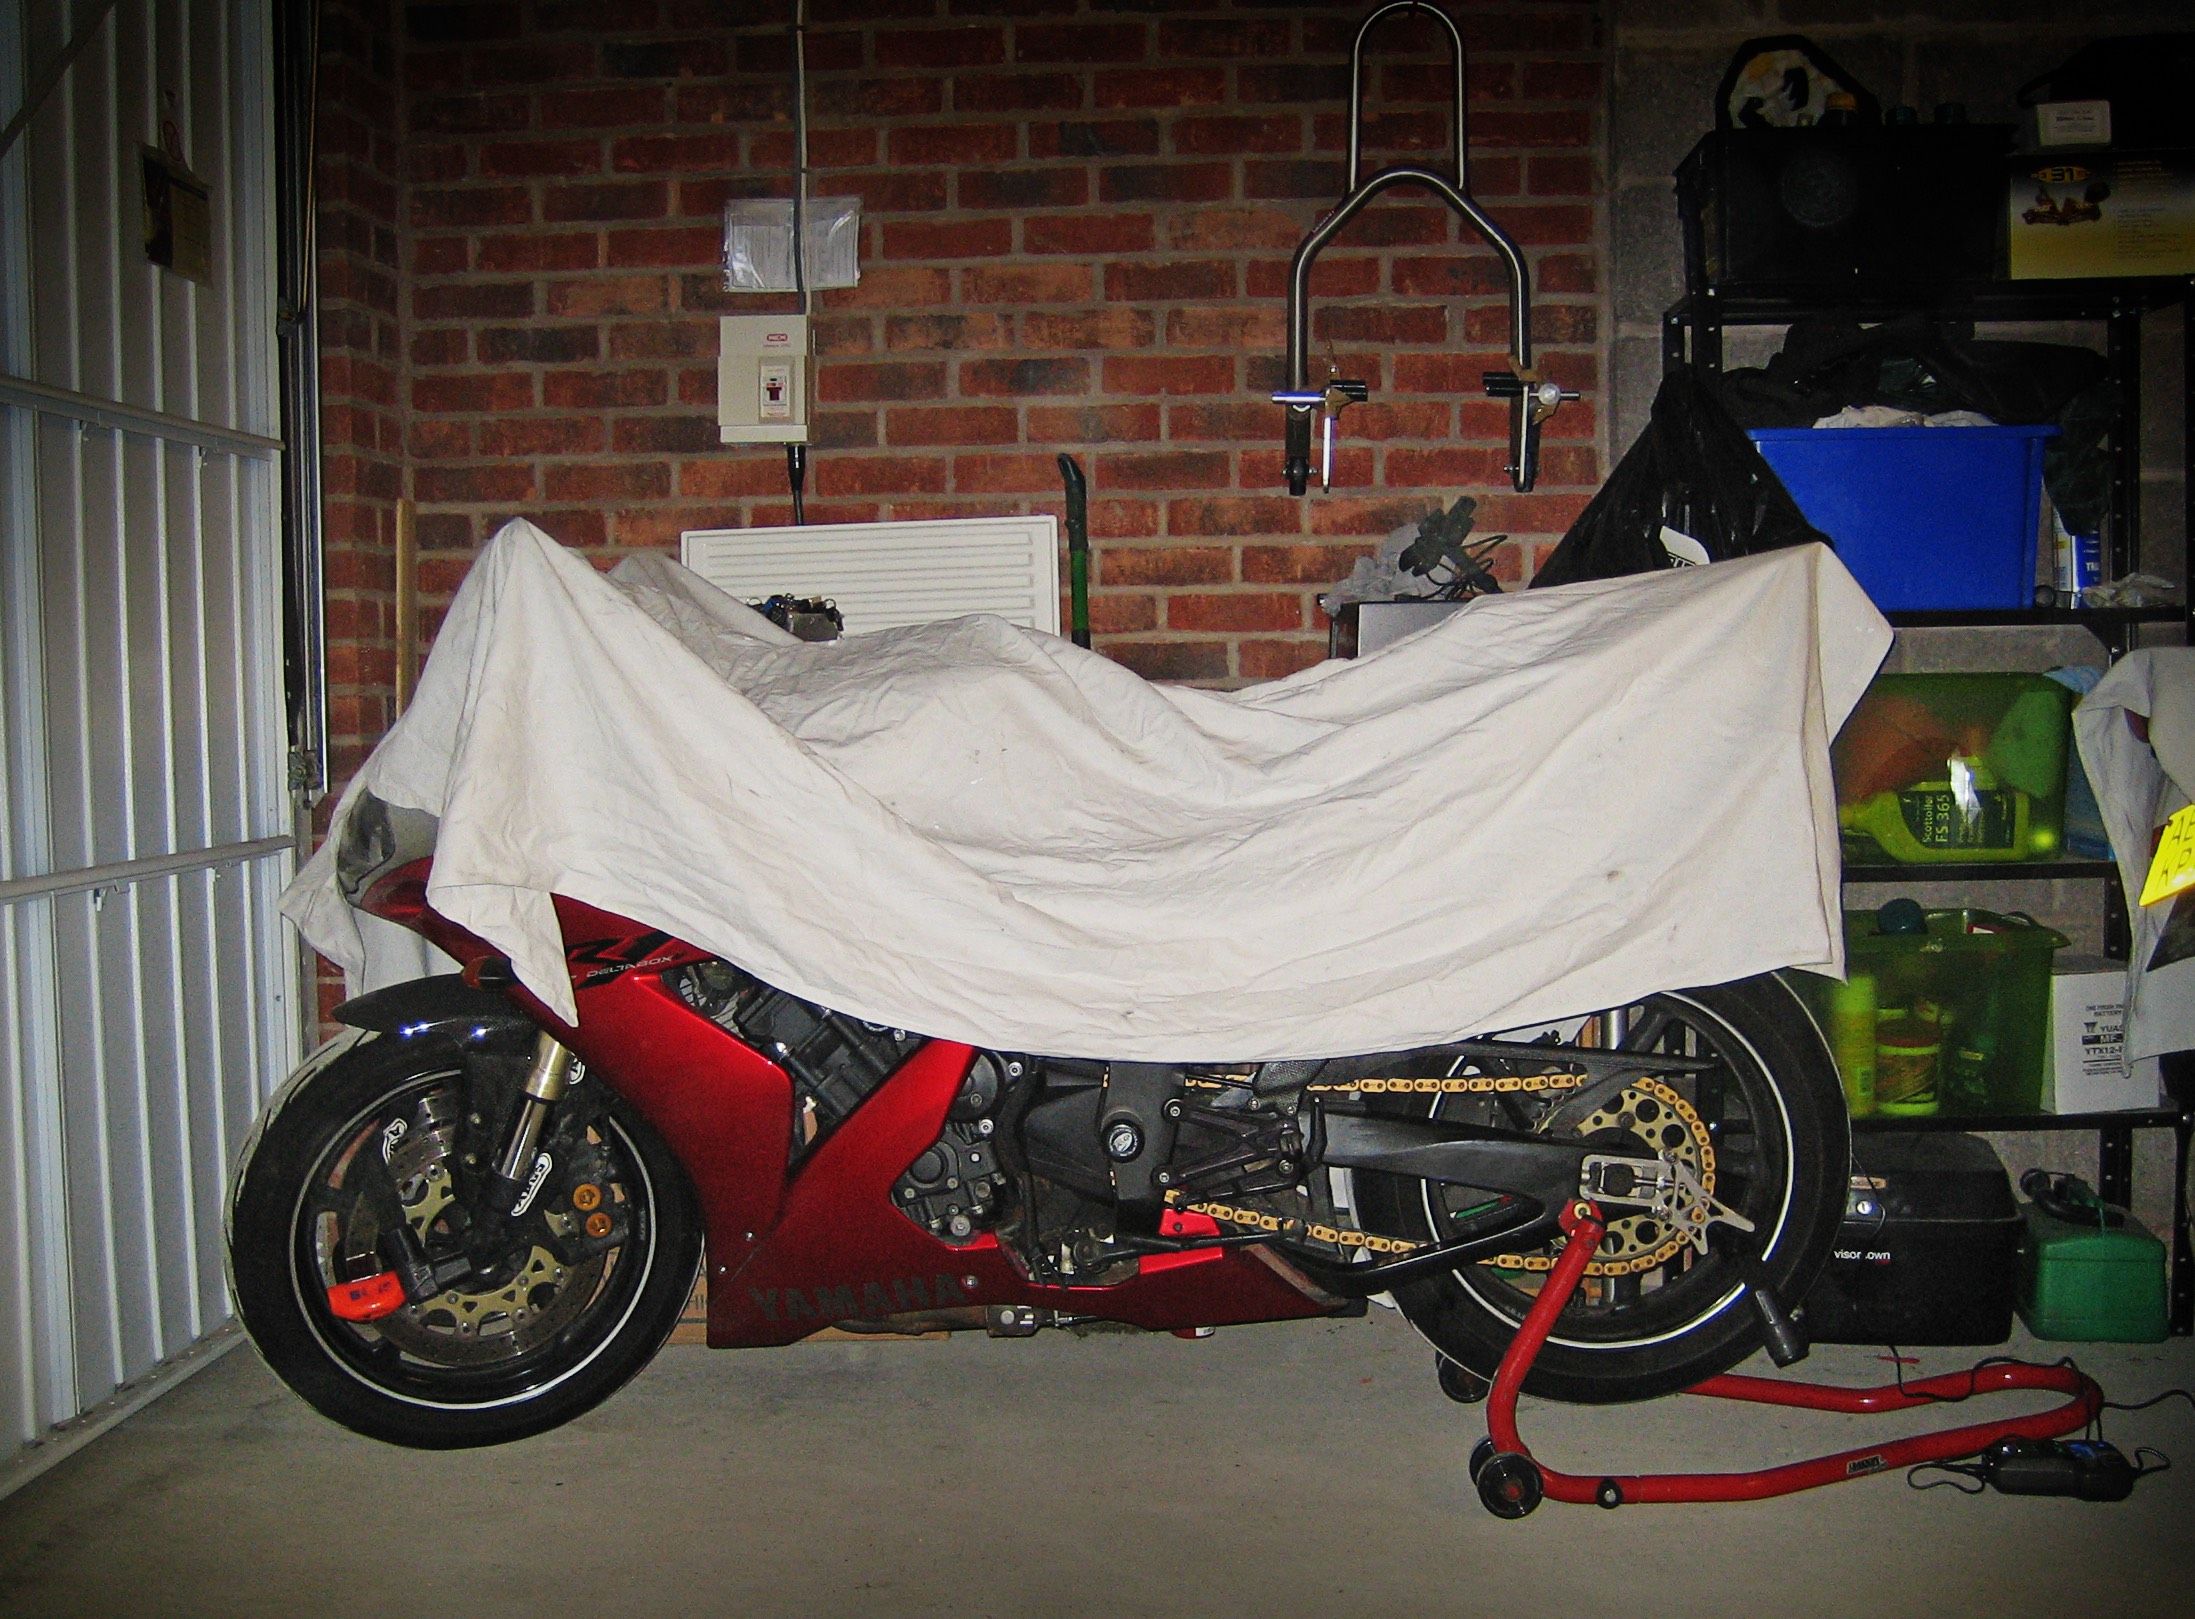 SORN motorbike under covers in the garage